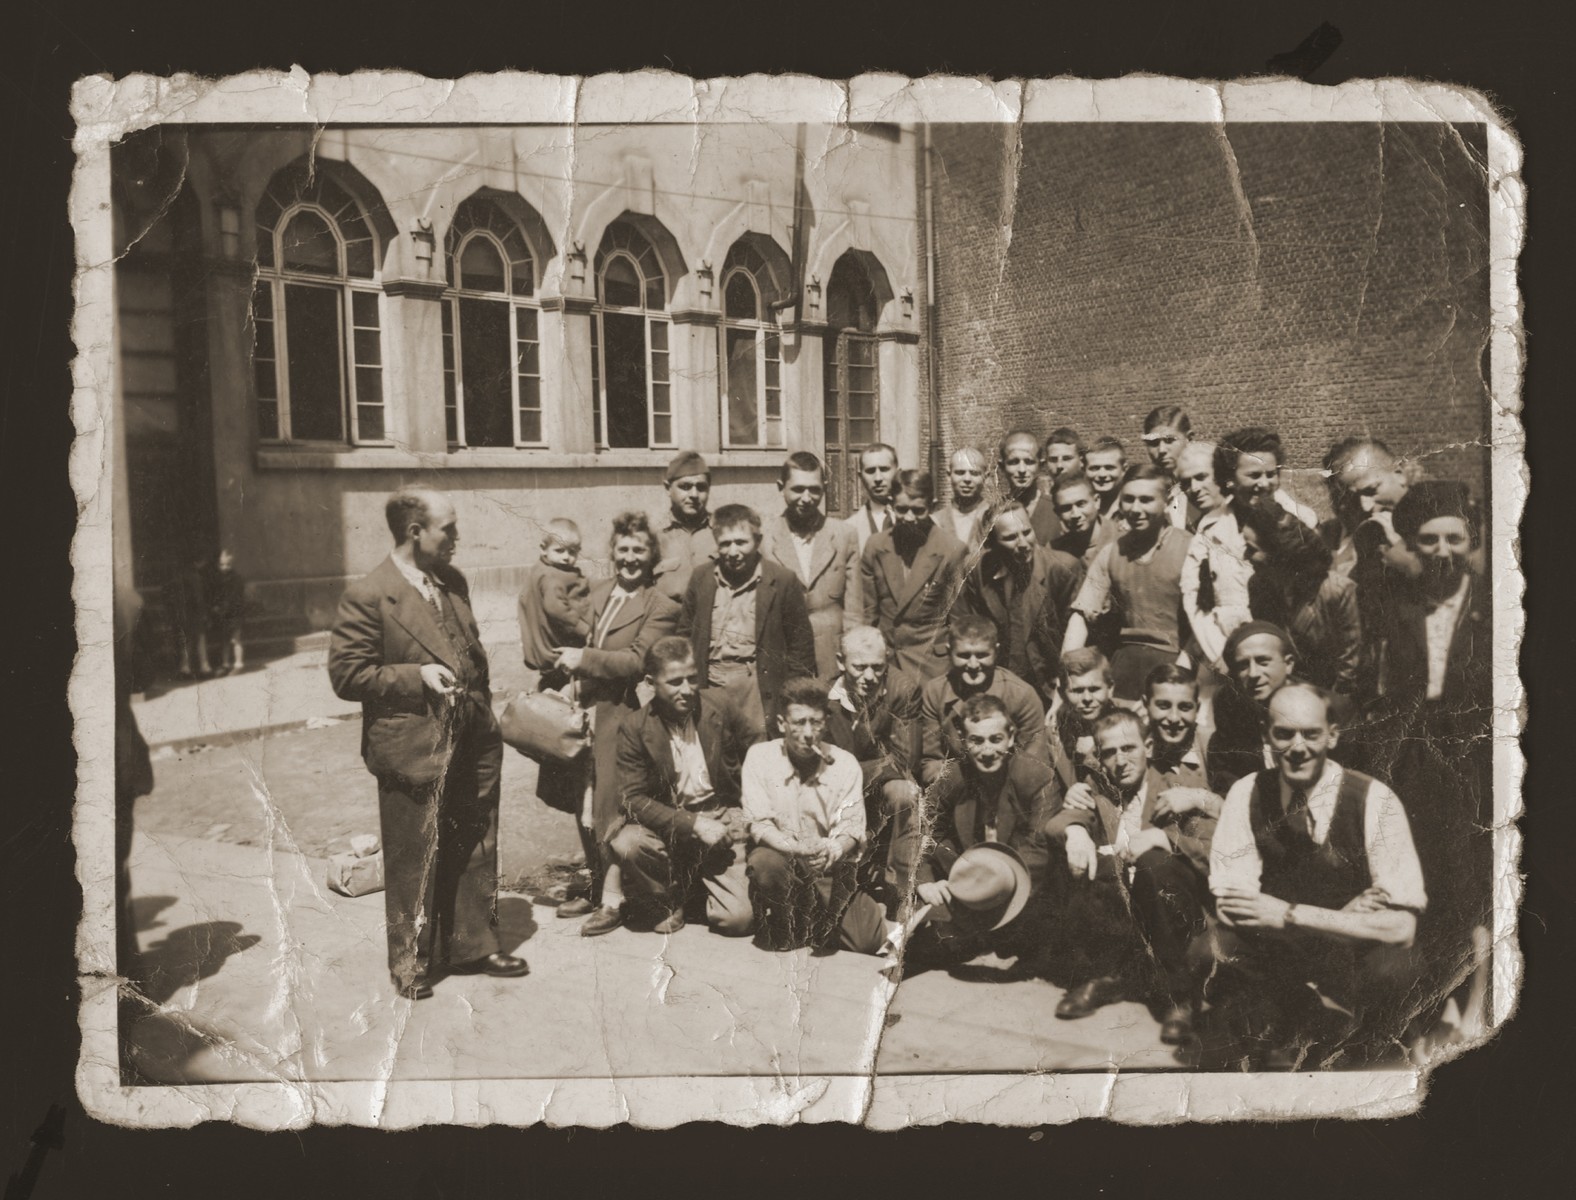 Marjana Ulman (standing, far right) and David Majer Zalc (kneeling, far right) among a group of young people posing on a street corner in Antwerp.